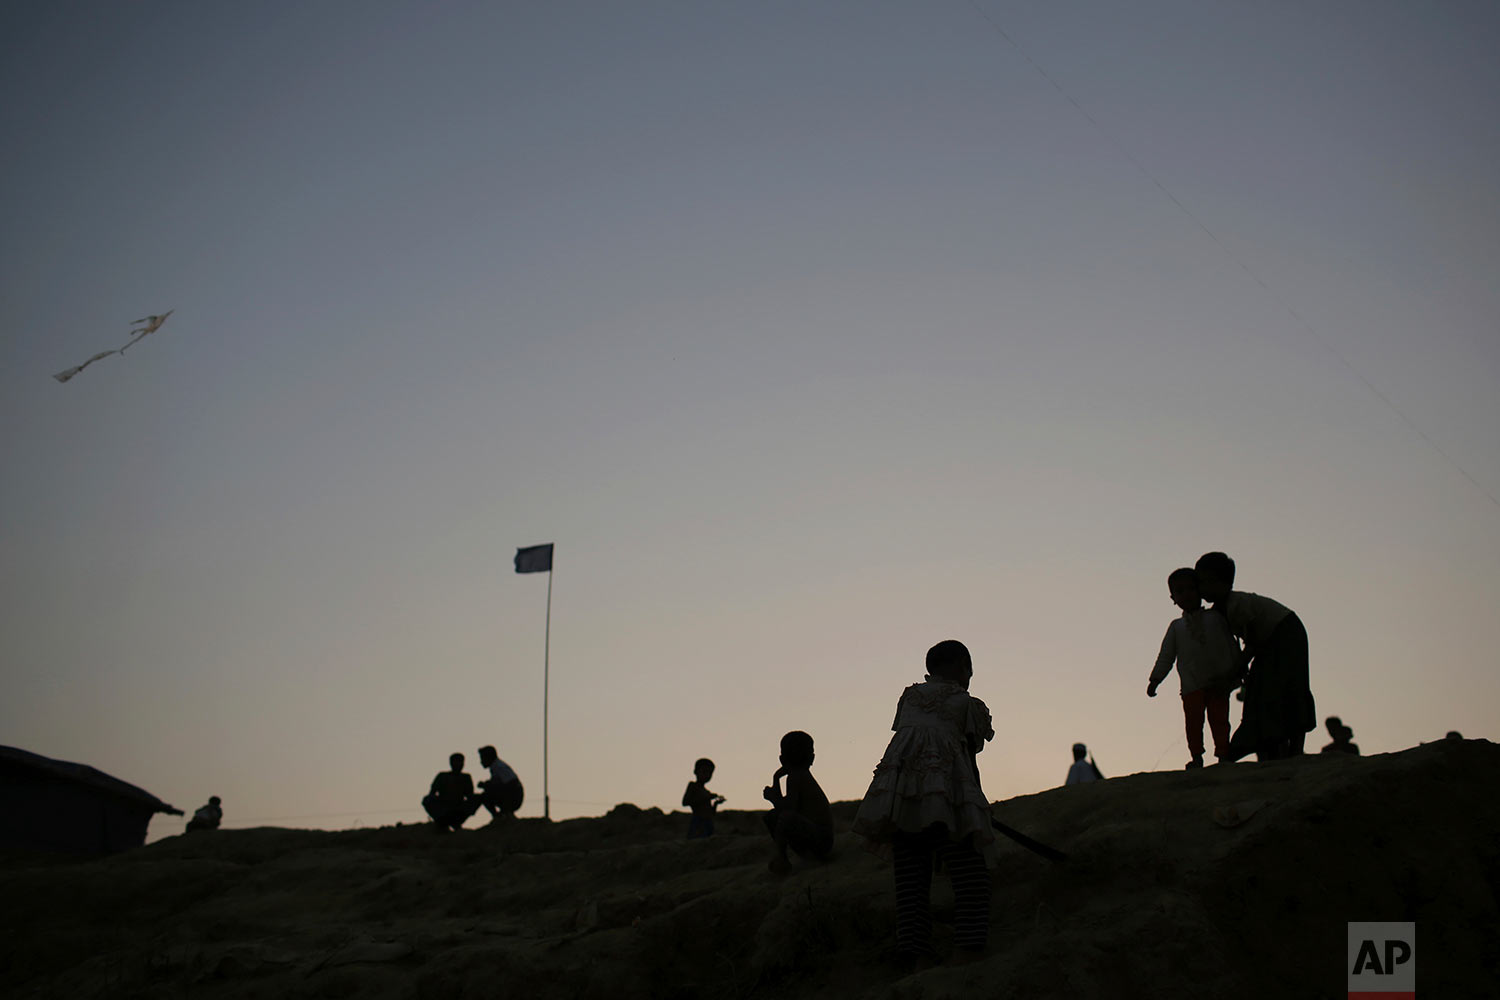  Rohingya Muslim children are silhouetted against the dusk sky in Jamtoli refugee camp on Monday, Nov. 27, 2017, in Bangladesh. Since late August, more than 620,000 Rohingya have fled Myanmar's Rakhine state into neighboring Bangladesh, where they ar